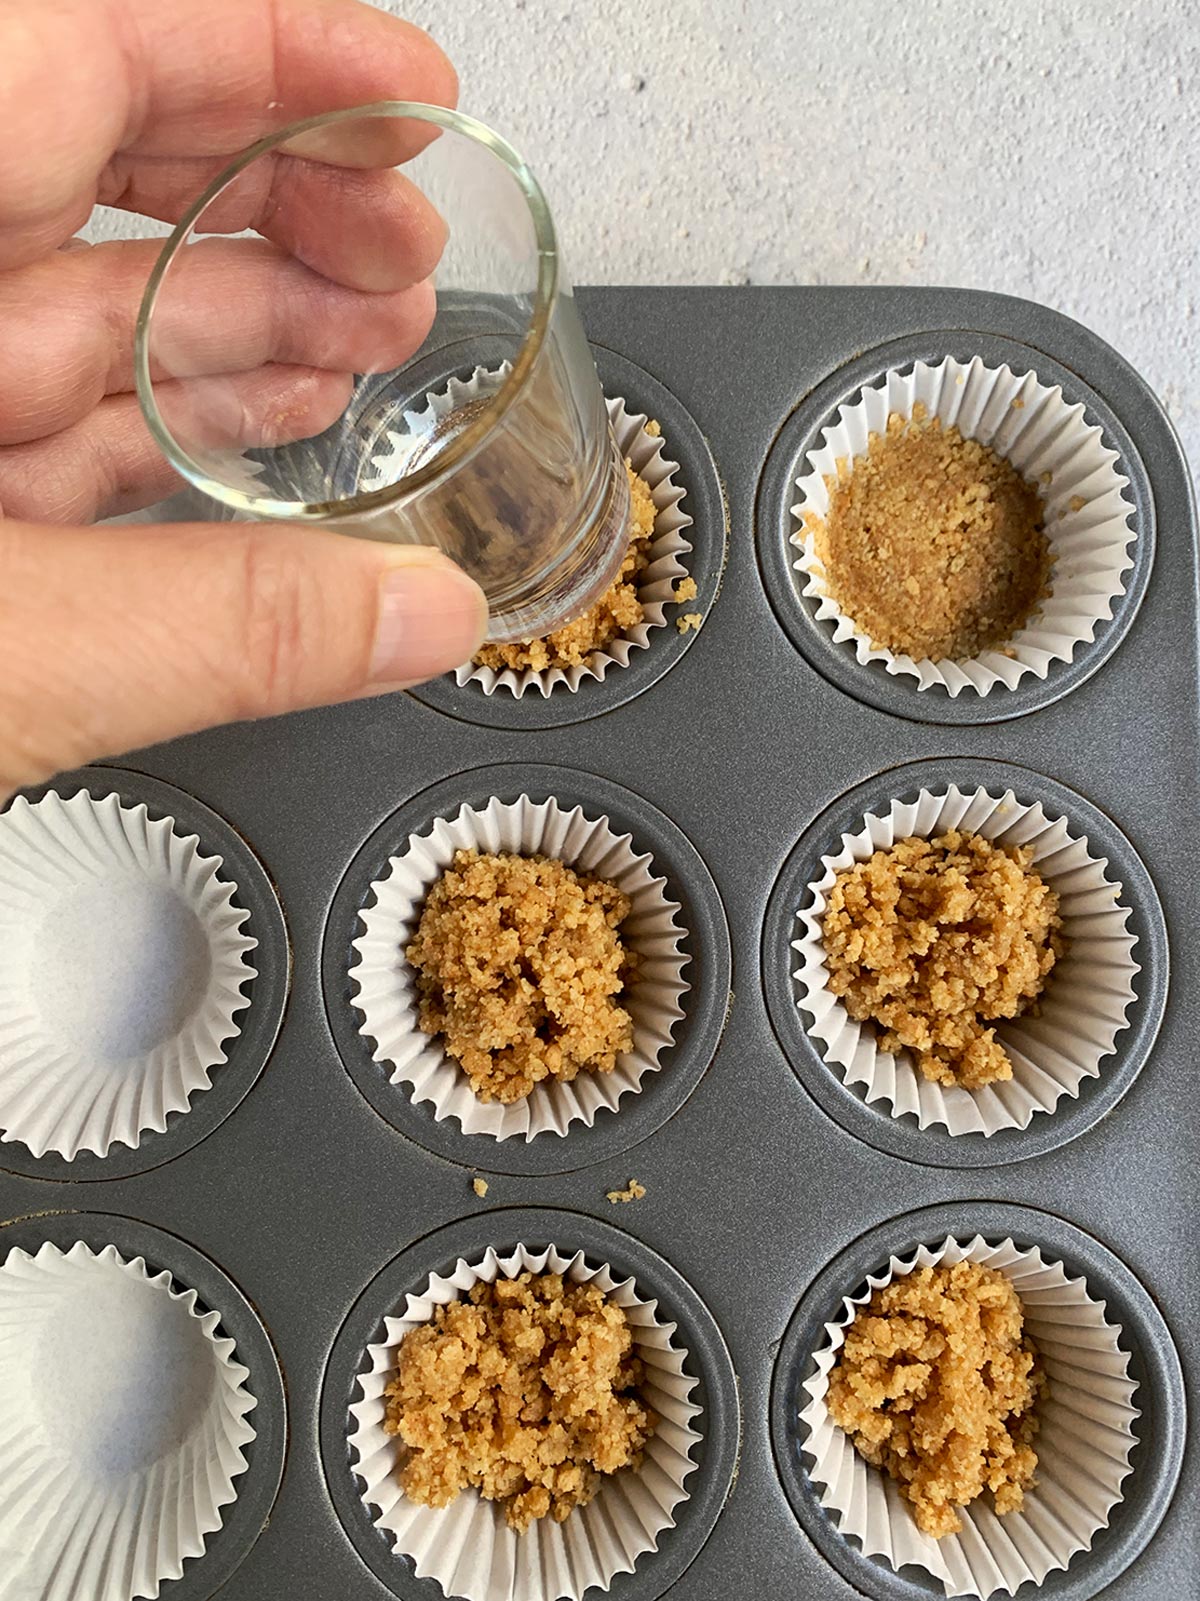 Graham cracker crust being pressed into mini muffin liner with a shot glass.